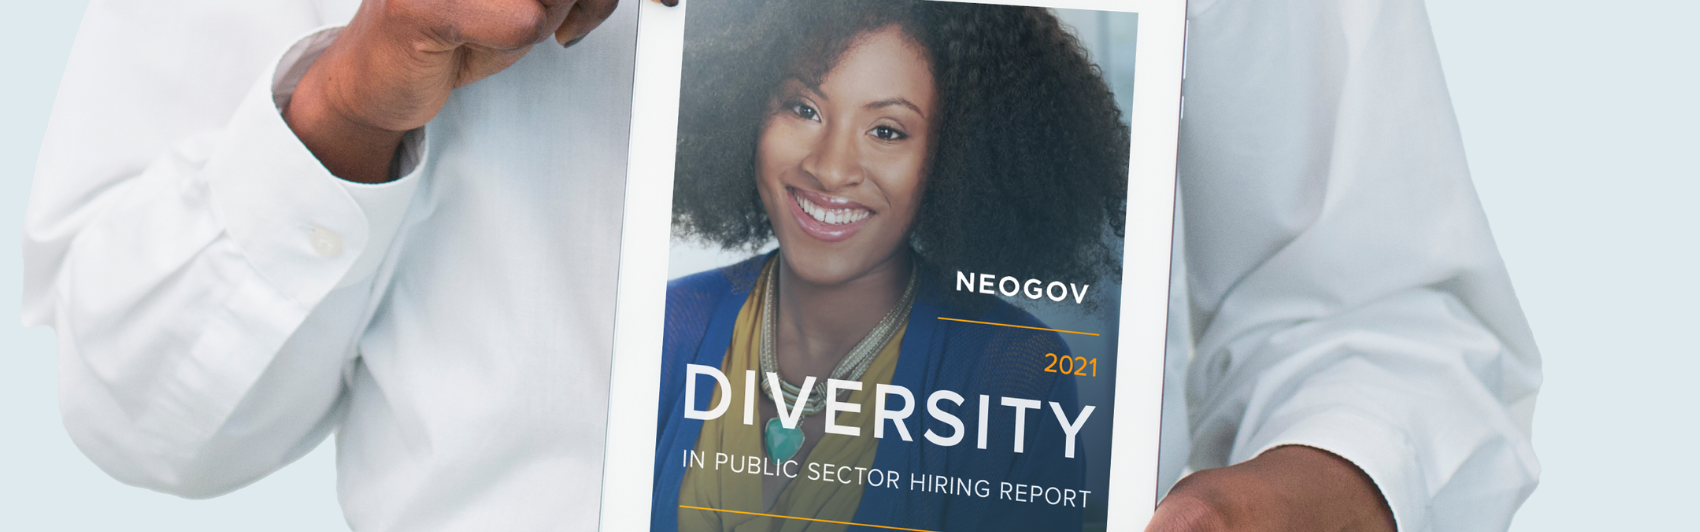 Black Females are 58% Less Likely to Be Hired in Government Than White Males, per 2021 Diversity Report from Governmentjobs.com